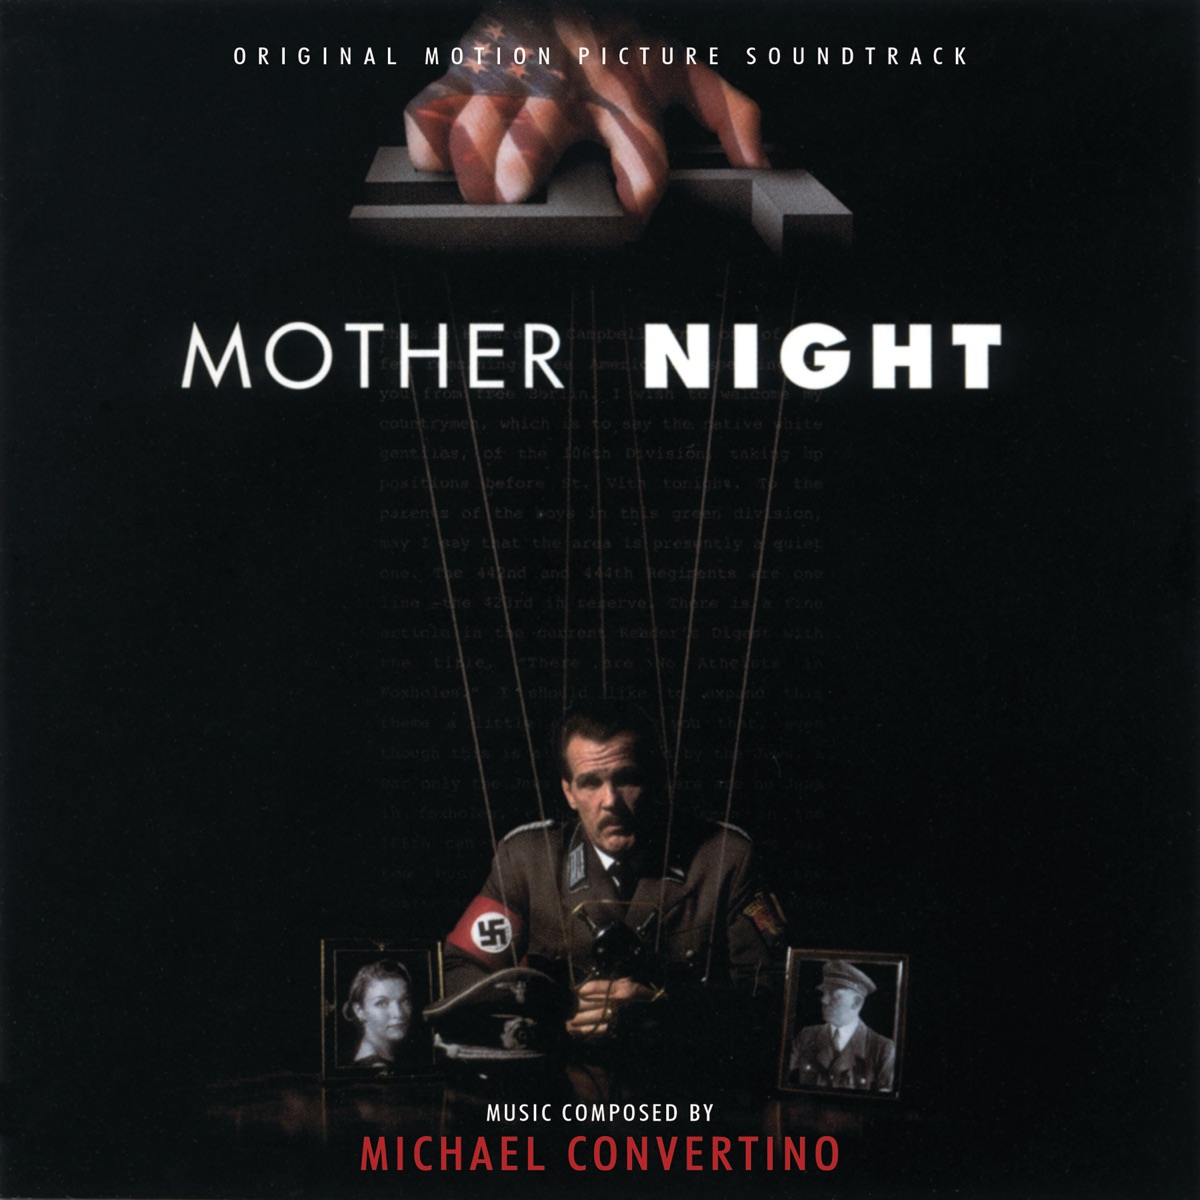 Bed of Roses (Michael Goldenberg's Original Motion Picture Soundtrack) by  Michael Convertino on Apple Music